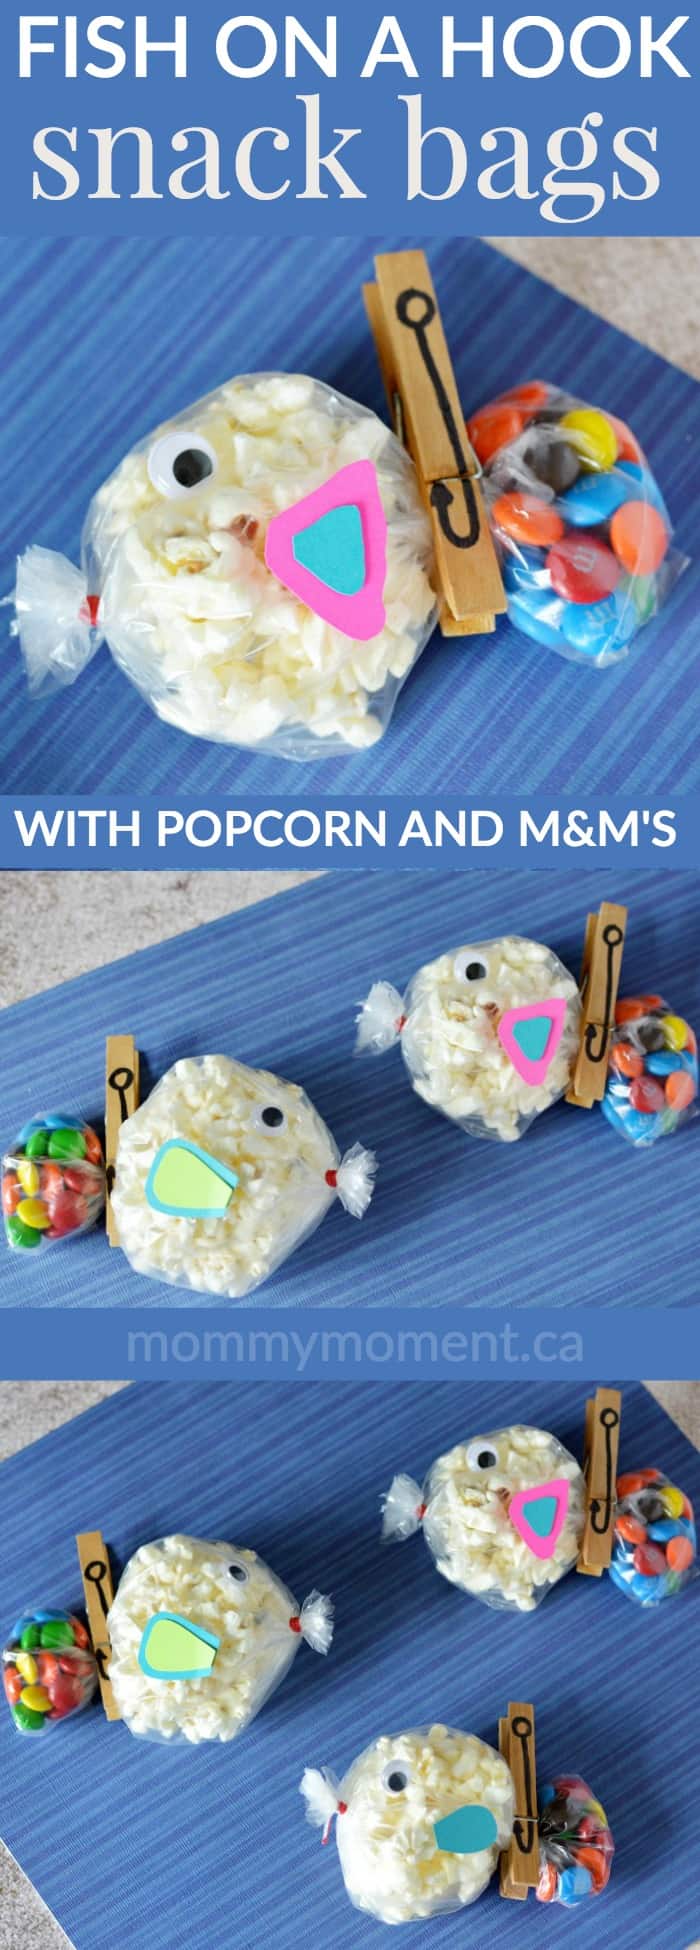 The cutest little fish snack bags made with popcorn and m&m's. I love the clothespin fish hook. Such a great snack idea for kids birthday parties and school parties